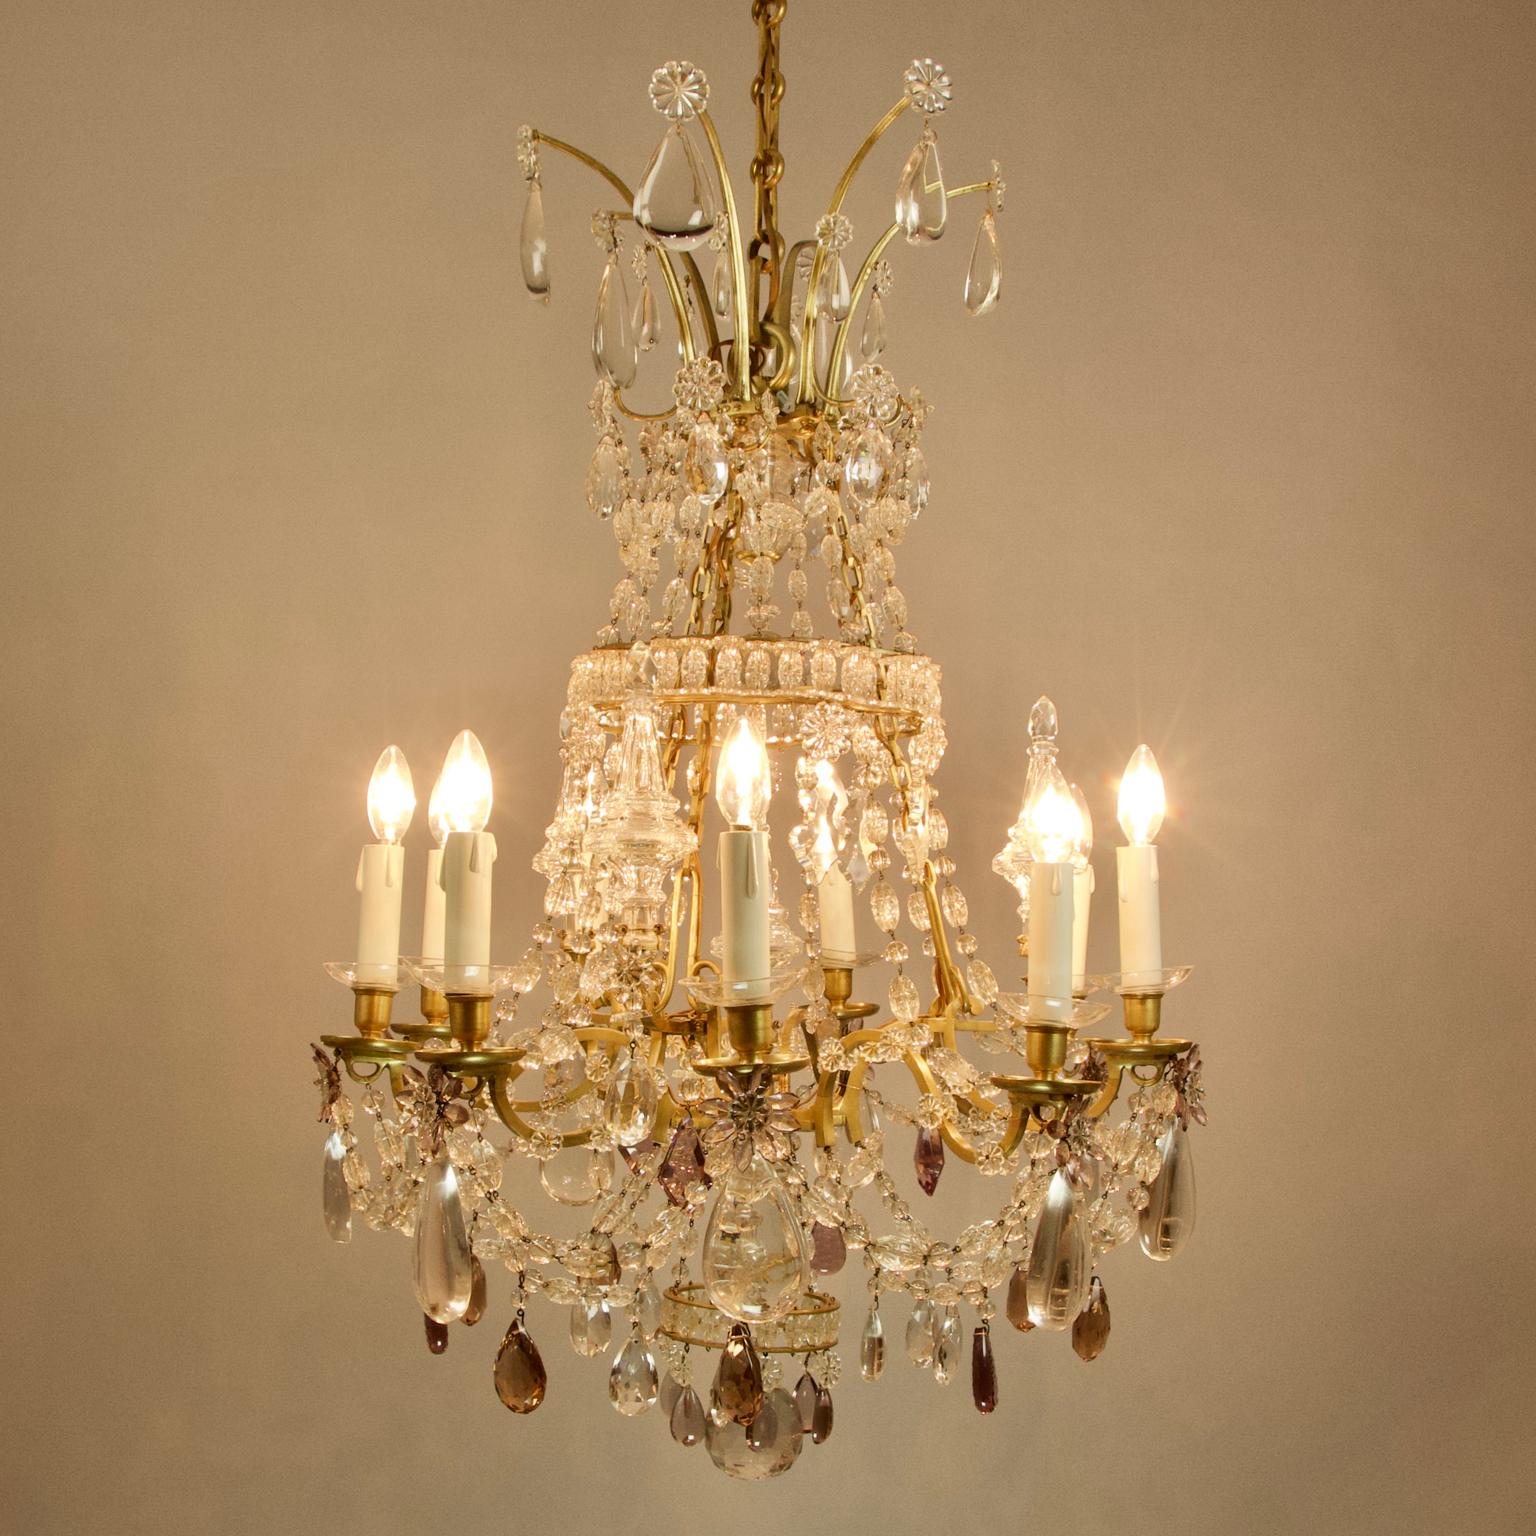 Large 19th century French Louis XV bronze crystal nine-light chandelier attributed to Maison Baguès

A large Louis XV style gilt bronze and cut crystal glass chandelier attributed to the Paris manufacturer Maison Baguès. This nine-light chandelier